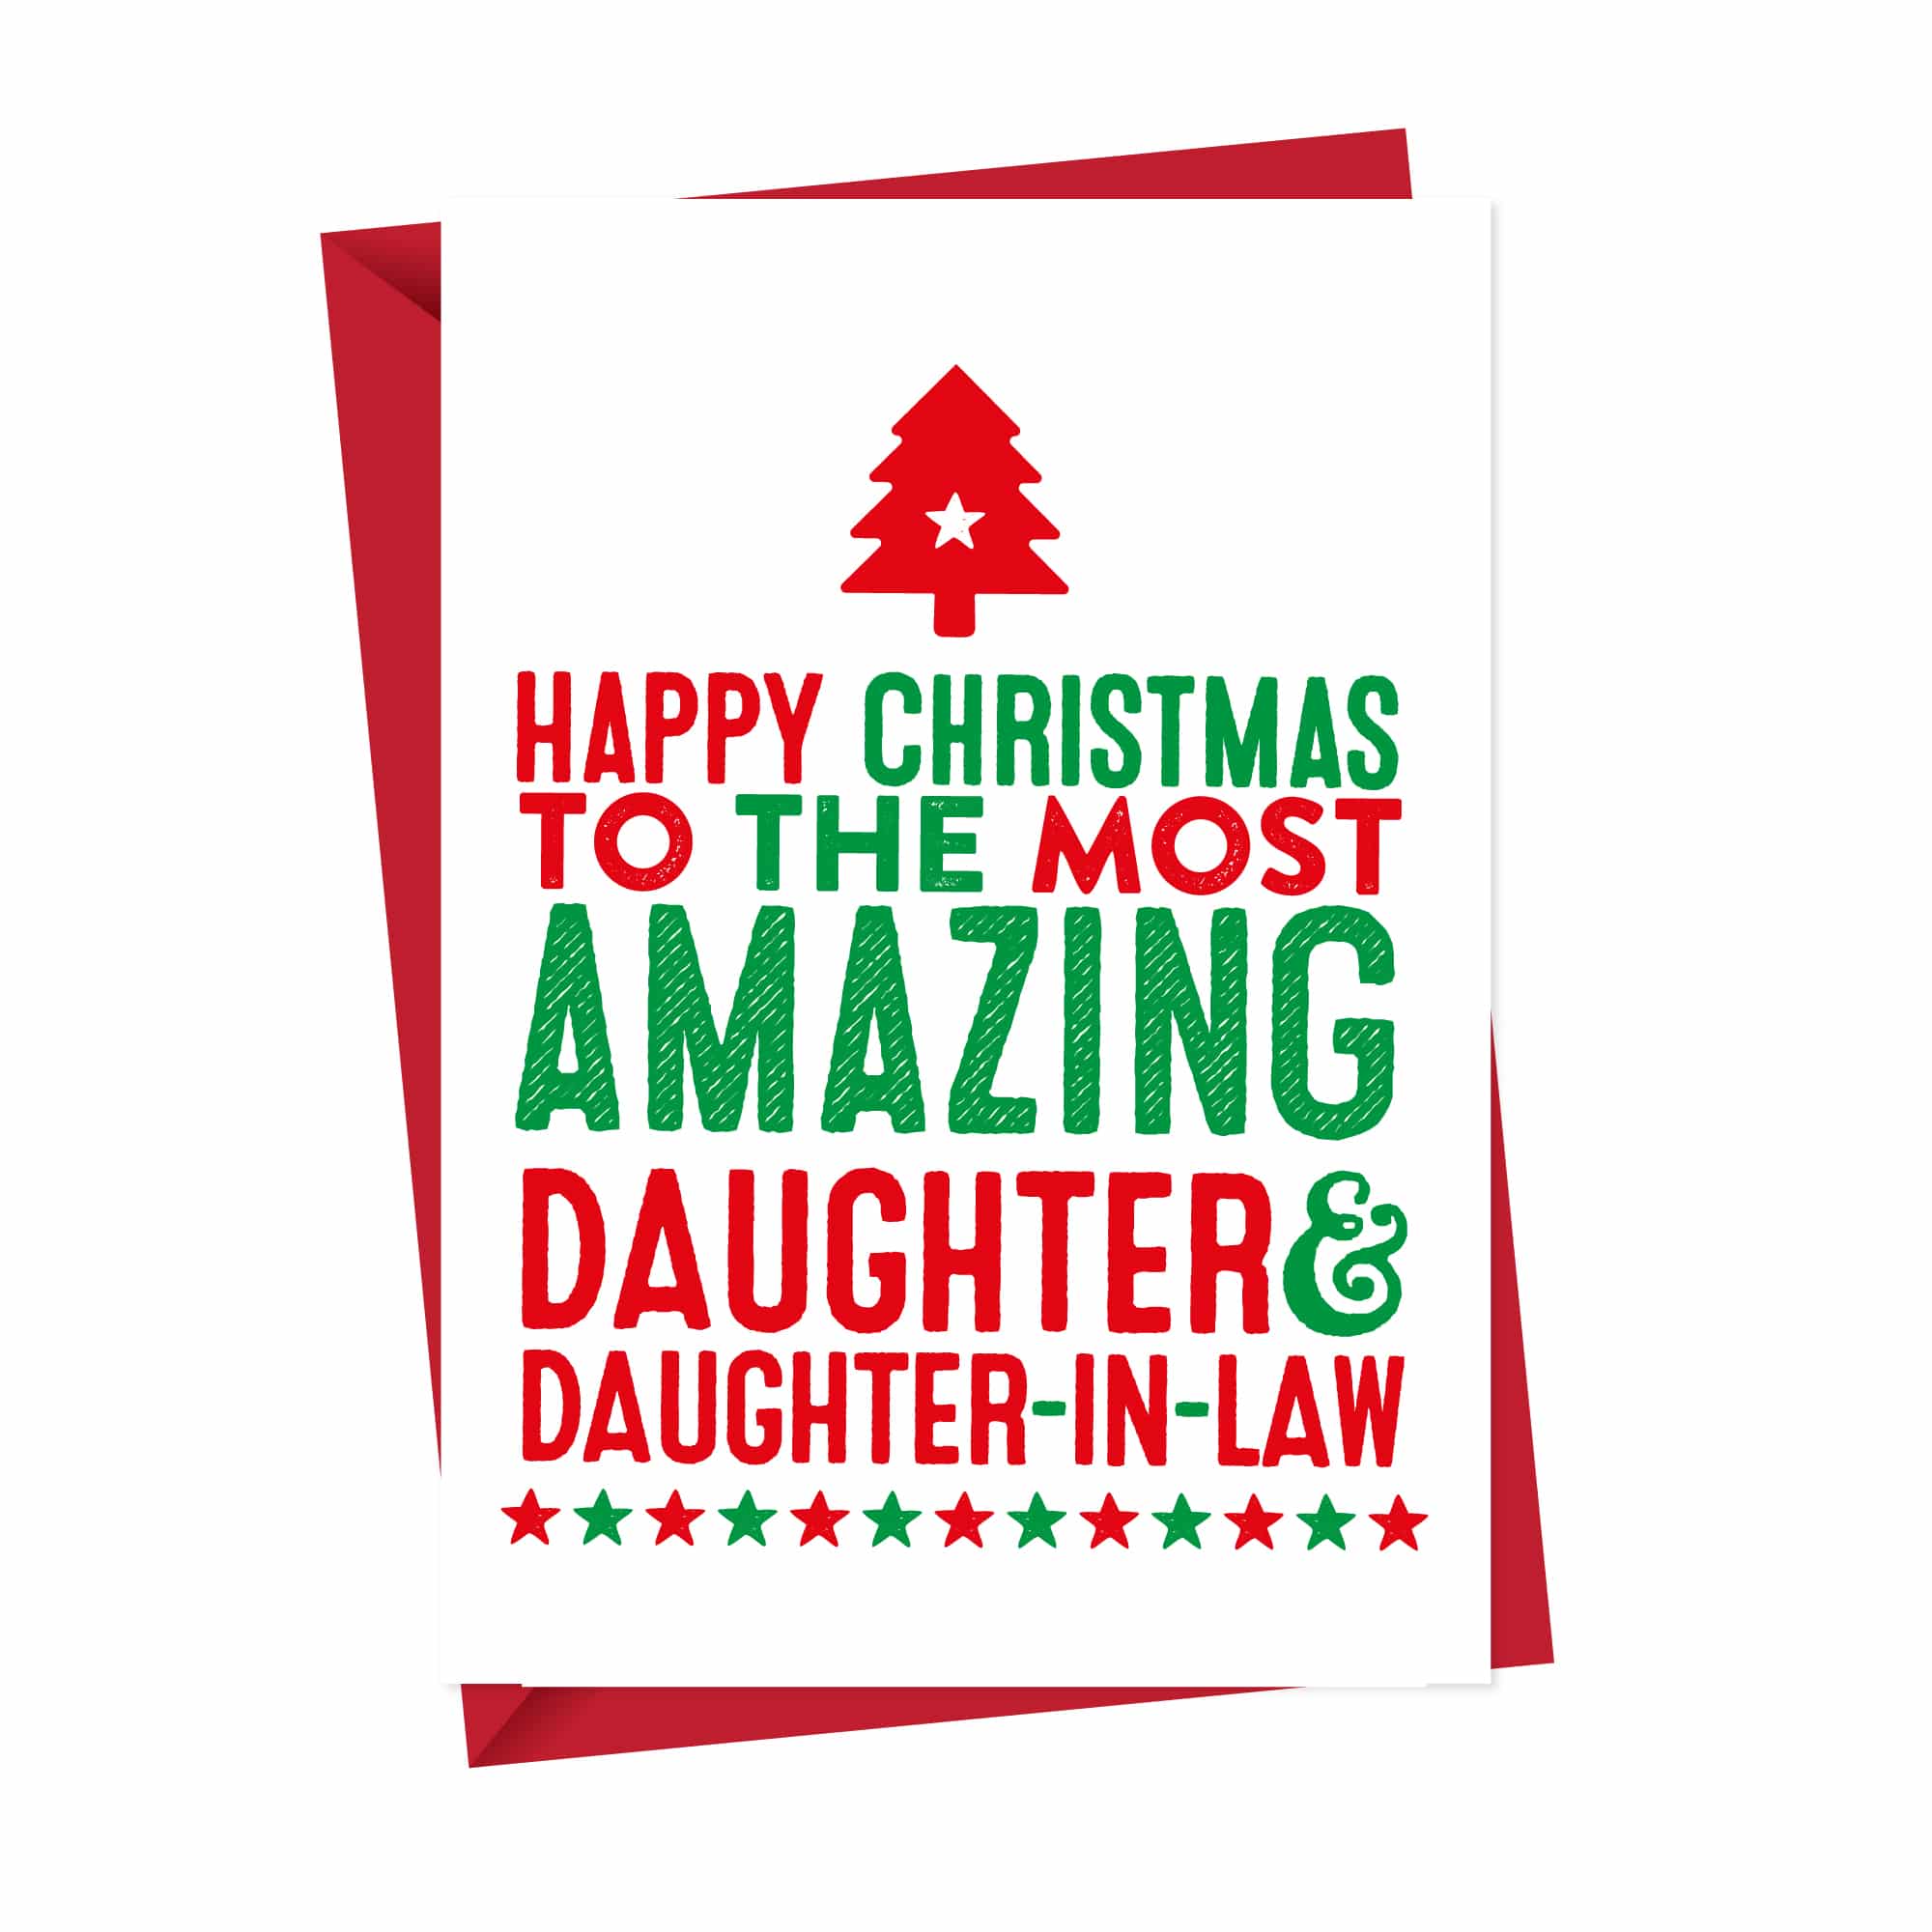 Amazing Daughter & Daughter in Law Christmas Card